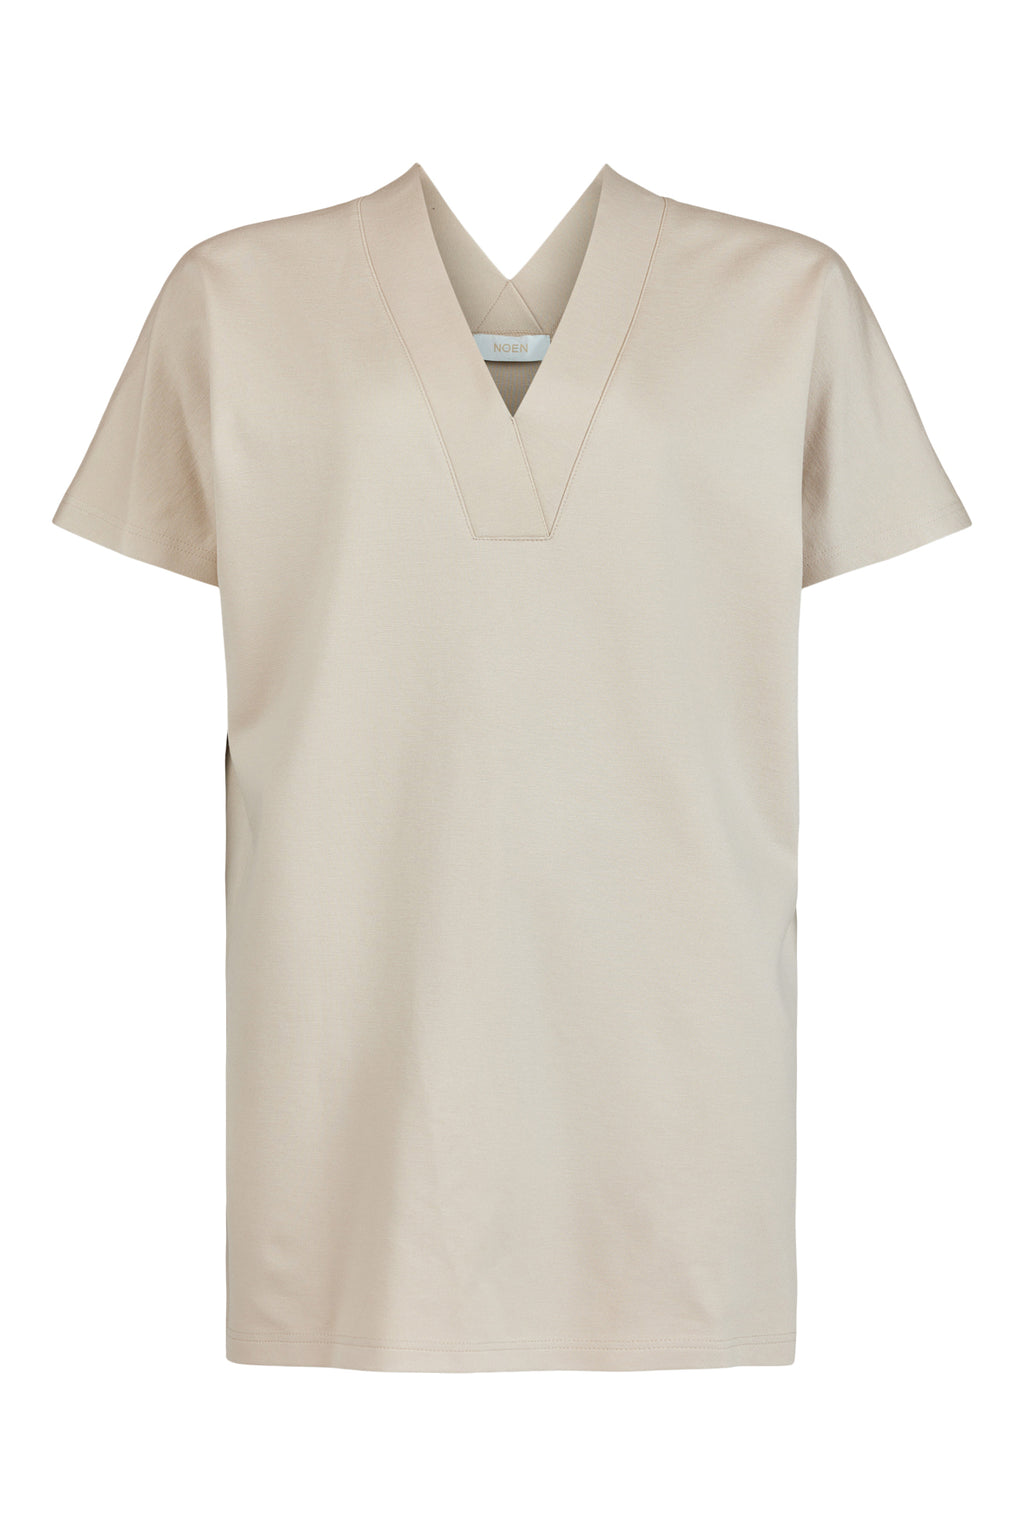 Enhance your wardrobe with our Tunic in Sand, a perfect blend of fashion and functionality. Crafted from high-quality jersey fabric, this tunic offers utmost comfort and a soft touch against your skin.  Featuring a chic v-neck design in both the front and back, this tunic adds a touch of elegance to any ensemble. Its long-line silhouette and side splits not only provide a flattering fit but also allow for easy movement and breath ability.